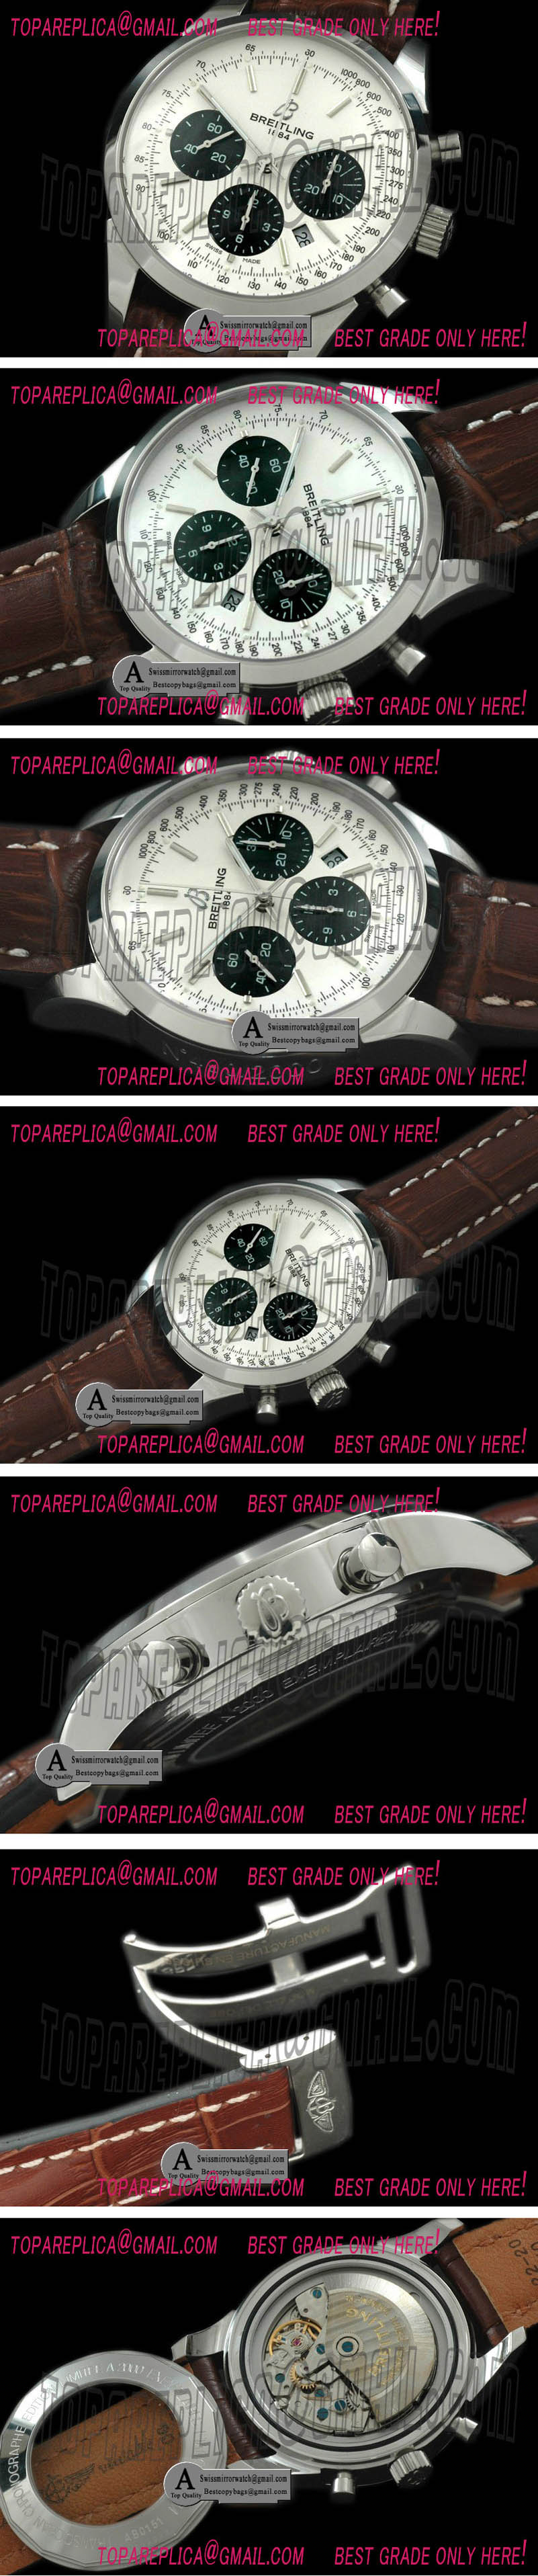 Breitling AB015212/G724 TransOcean Chrono Men SS/Leather White A-7750 28800bph Replica Watches